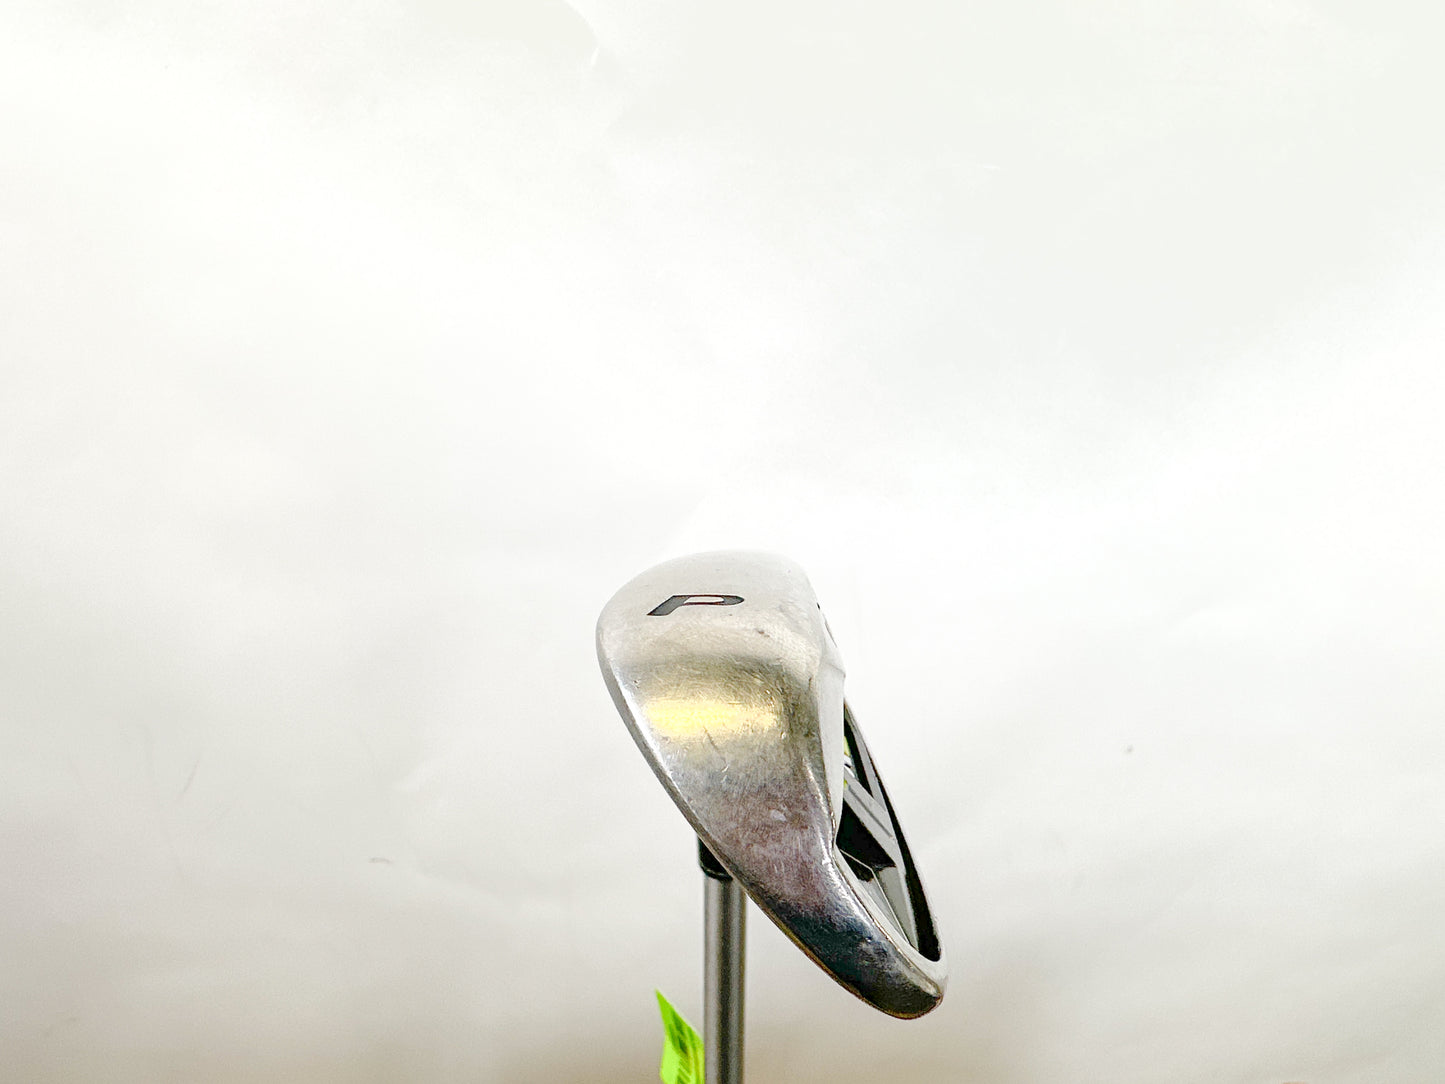 Used TaylorMade M2 2017 Gap Wedge - Right-Handed - 49 Degrees - Seniors Flex-Next Round